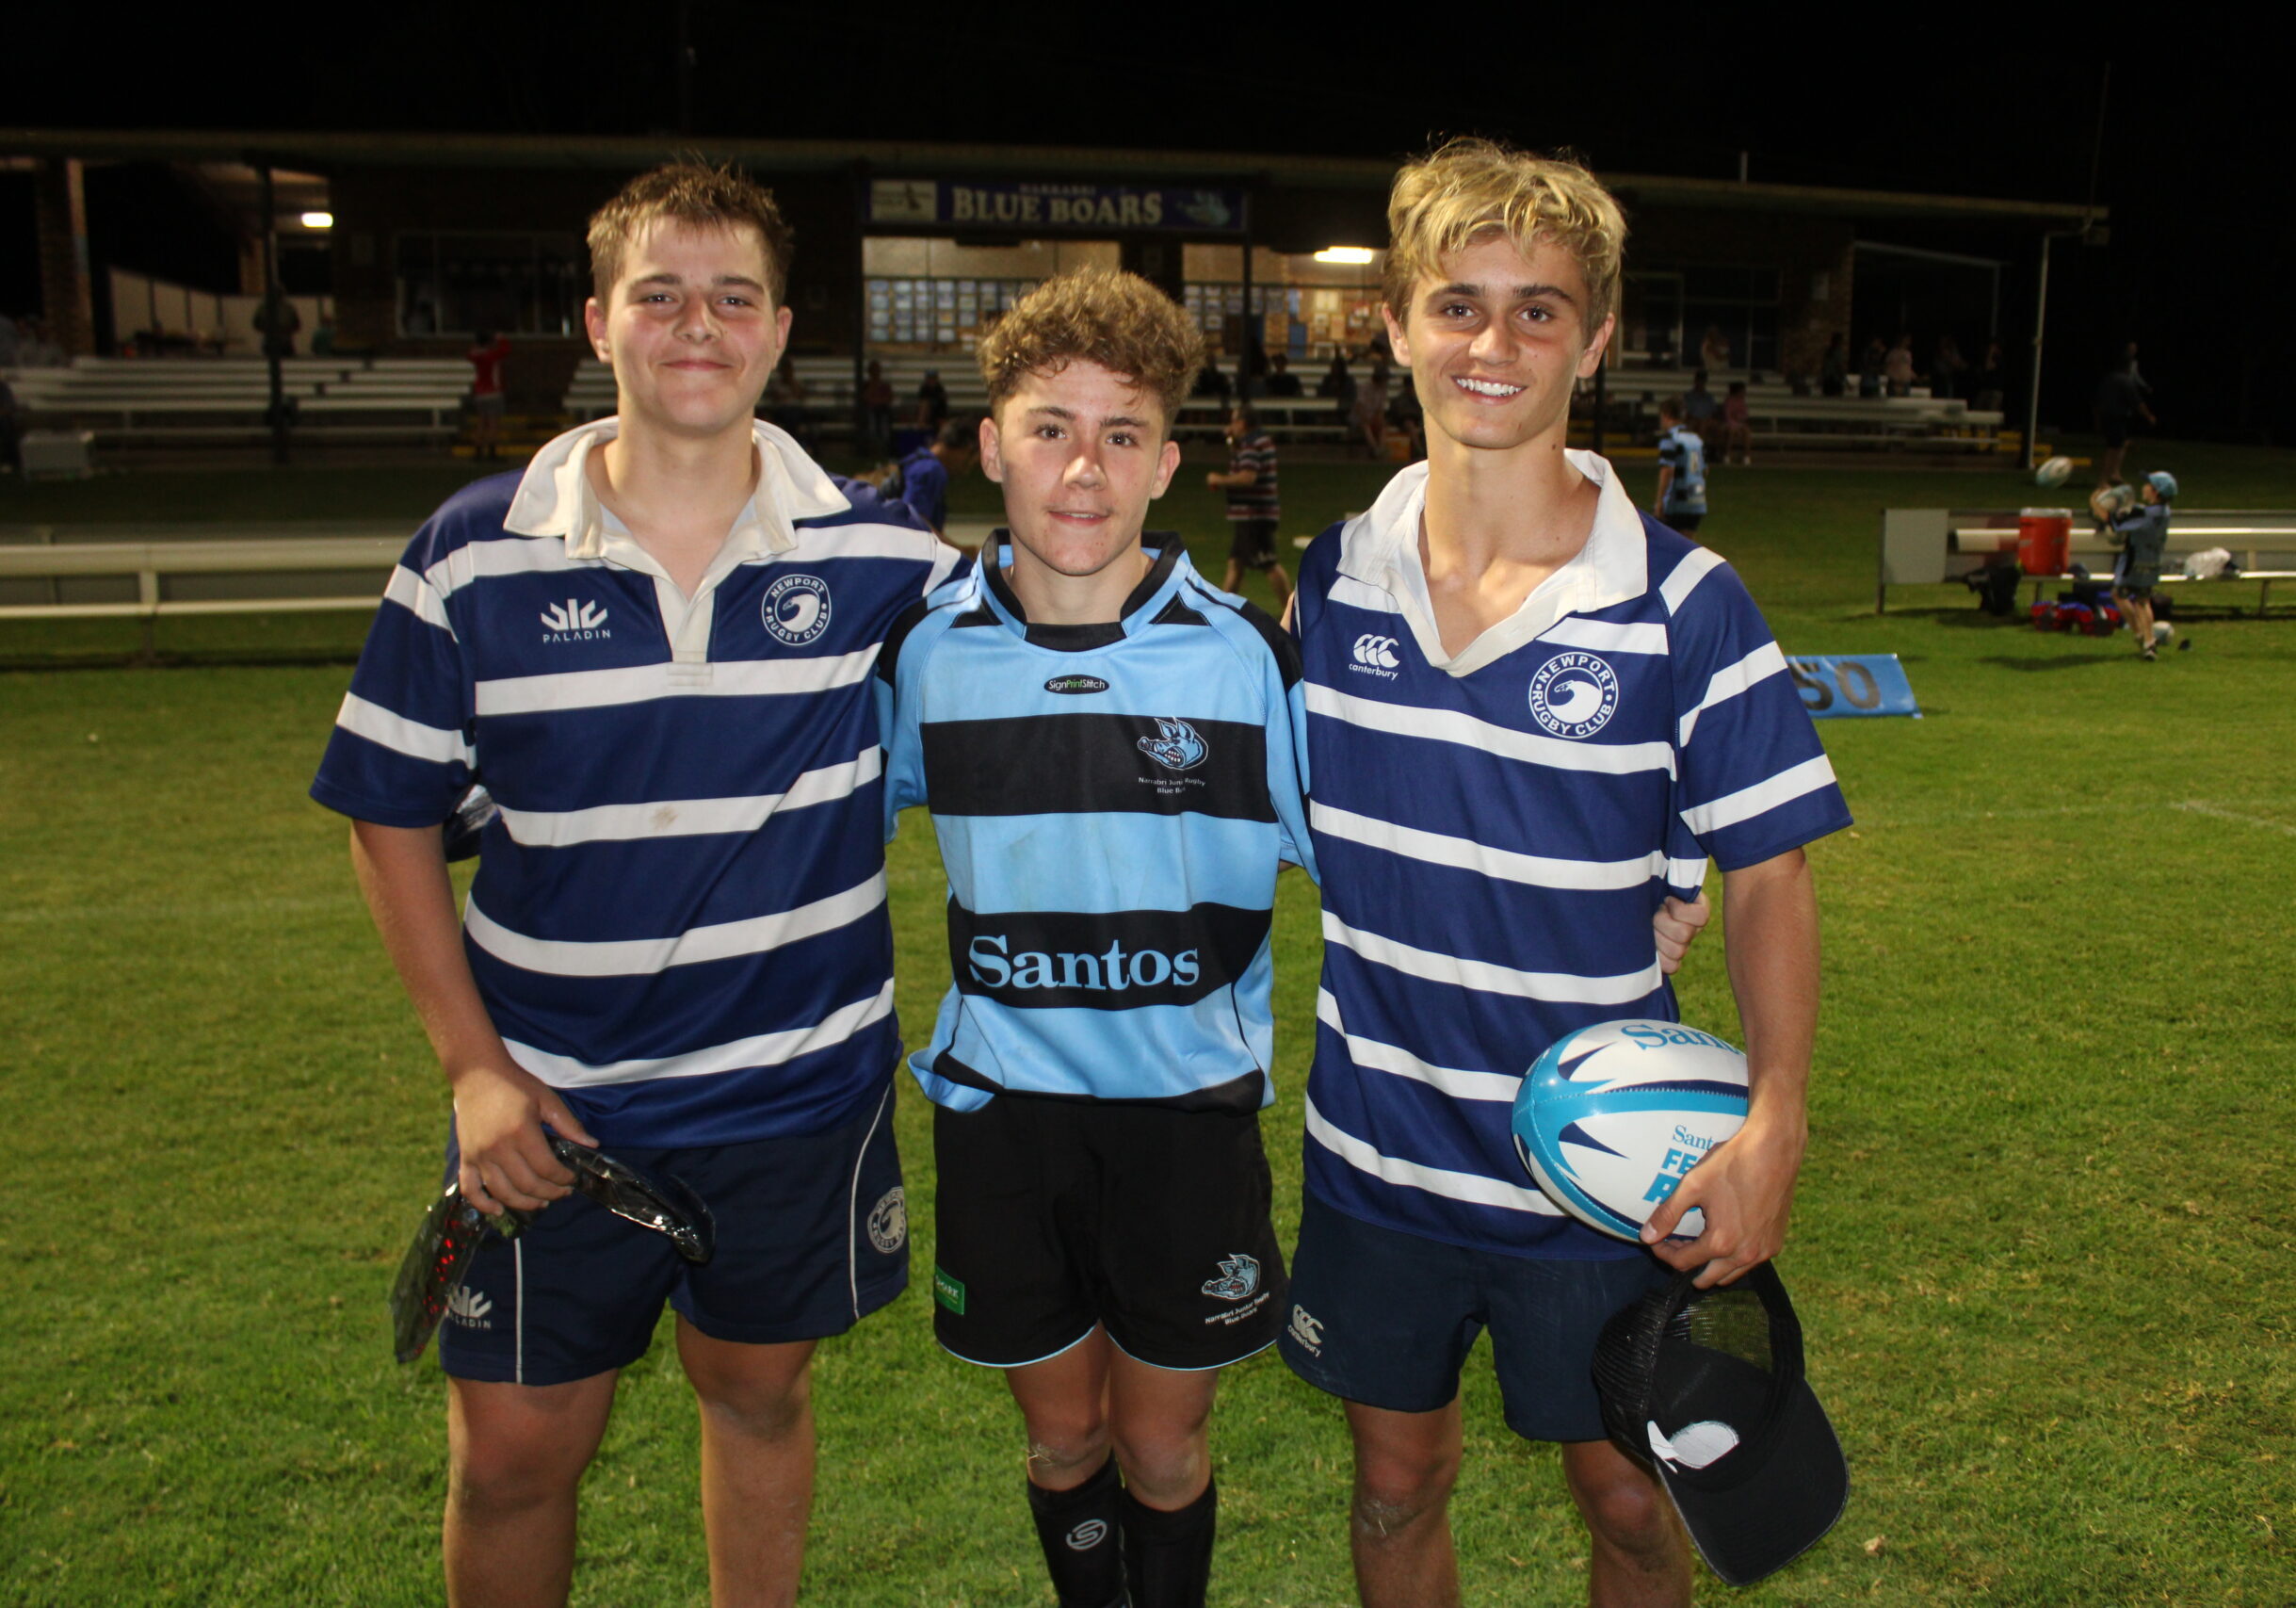 Narrabri Junior Rugby Club hosts Newport under-15s during their country road trip - The Courier